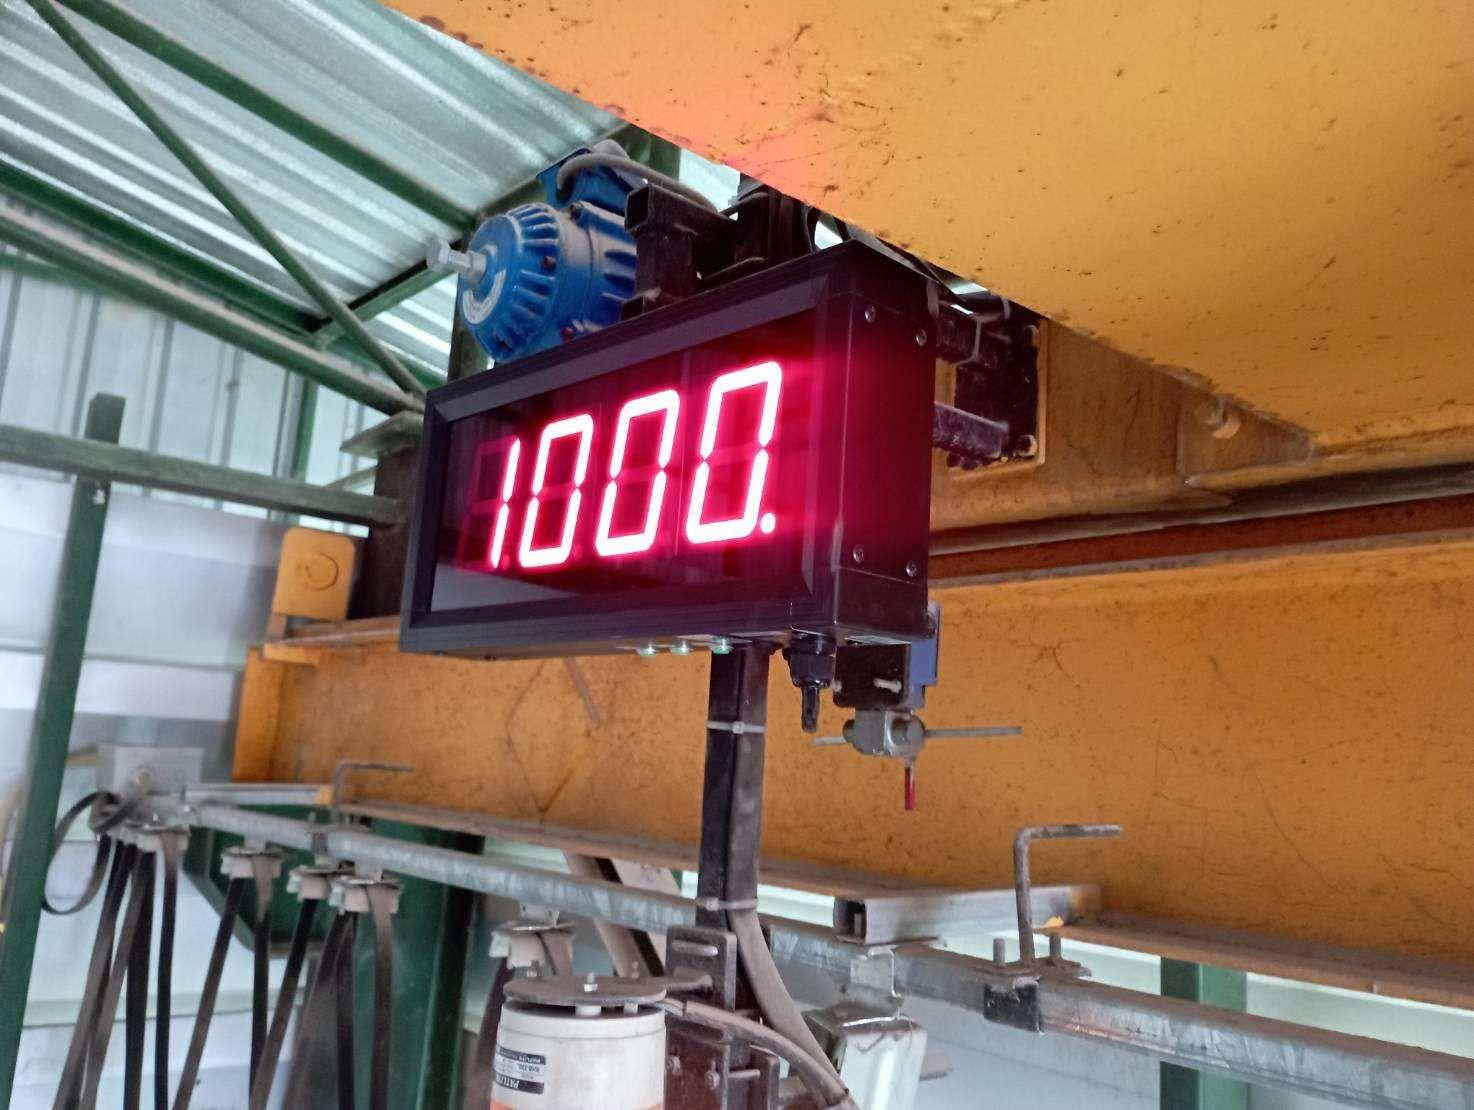 Load Weight Indicator for Overhead Crane